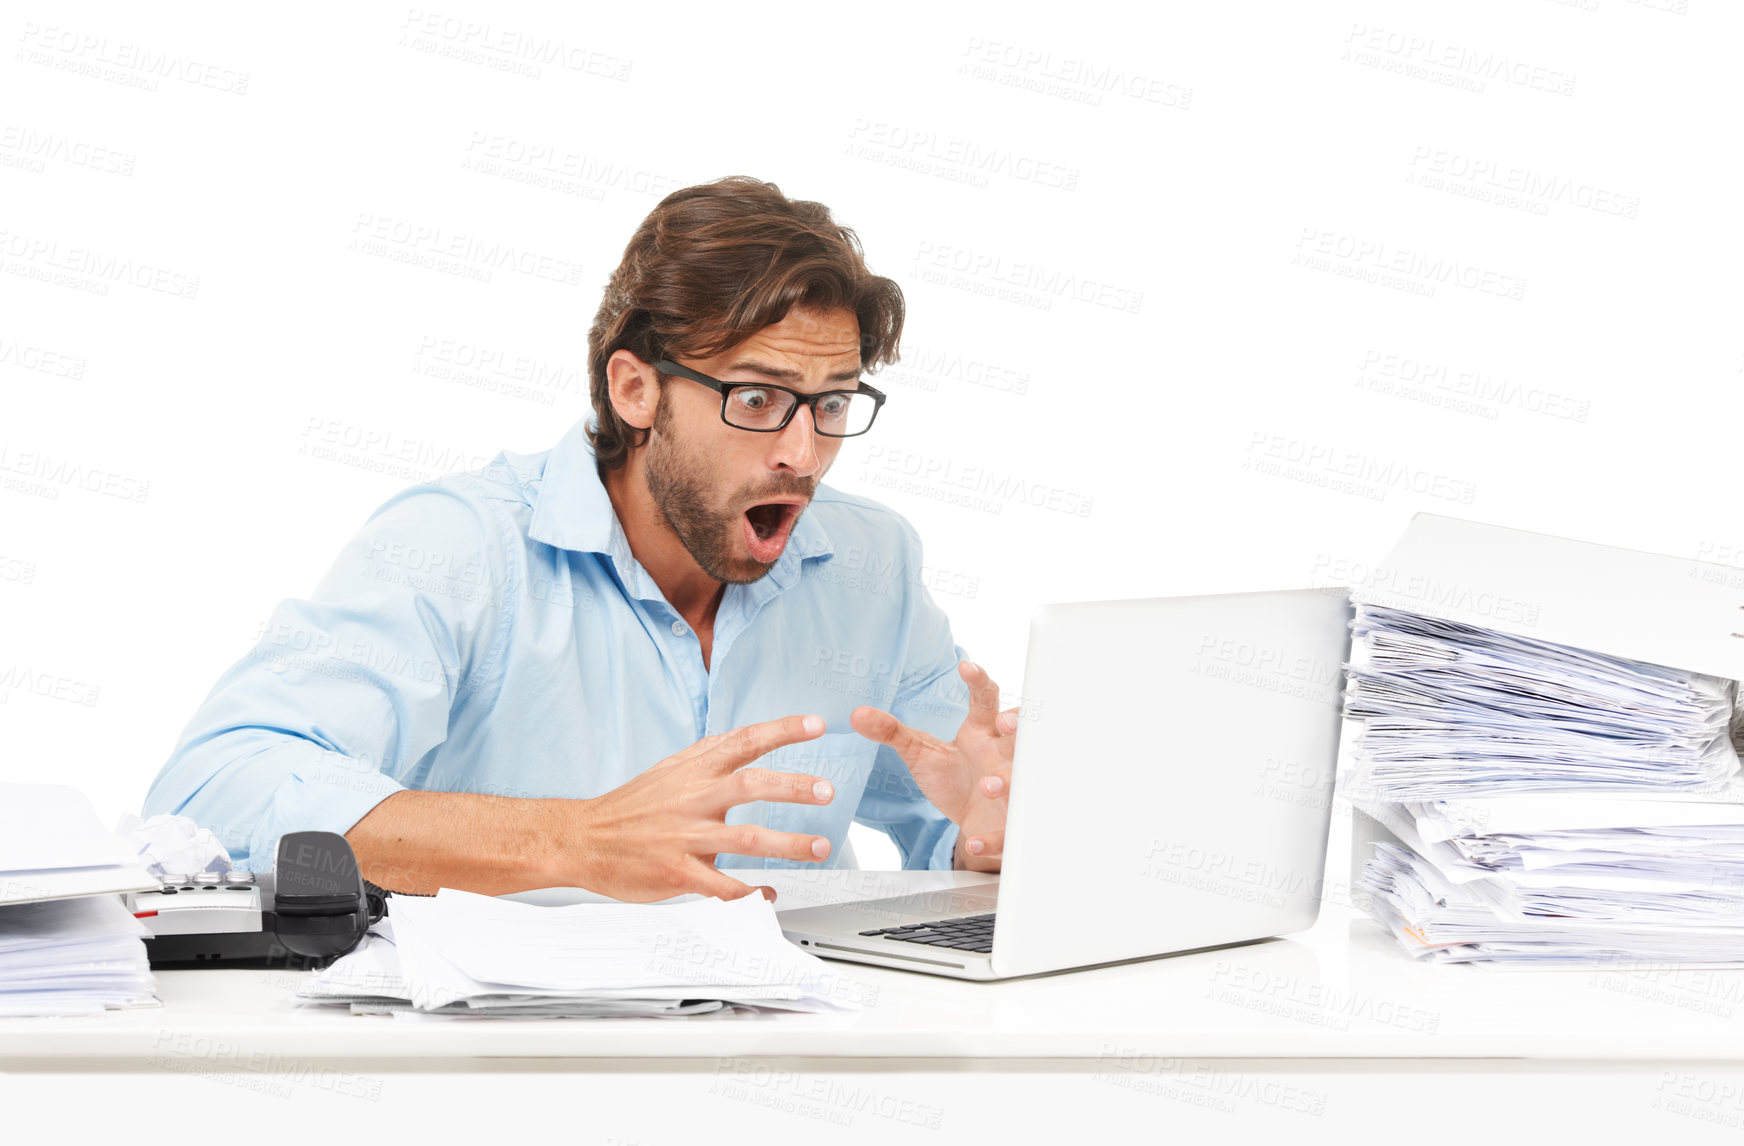 Buy stock photo Laptop, paperwork and businessman with shock after reading information online in studio. Shocked, surprise and professional male employee with wtf or omg facial expression with computer and documents